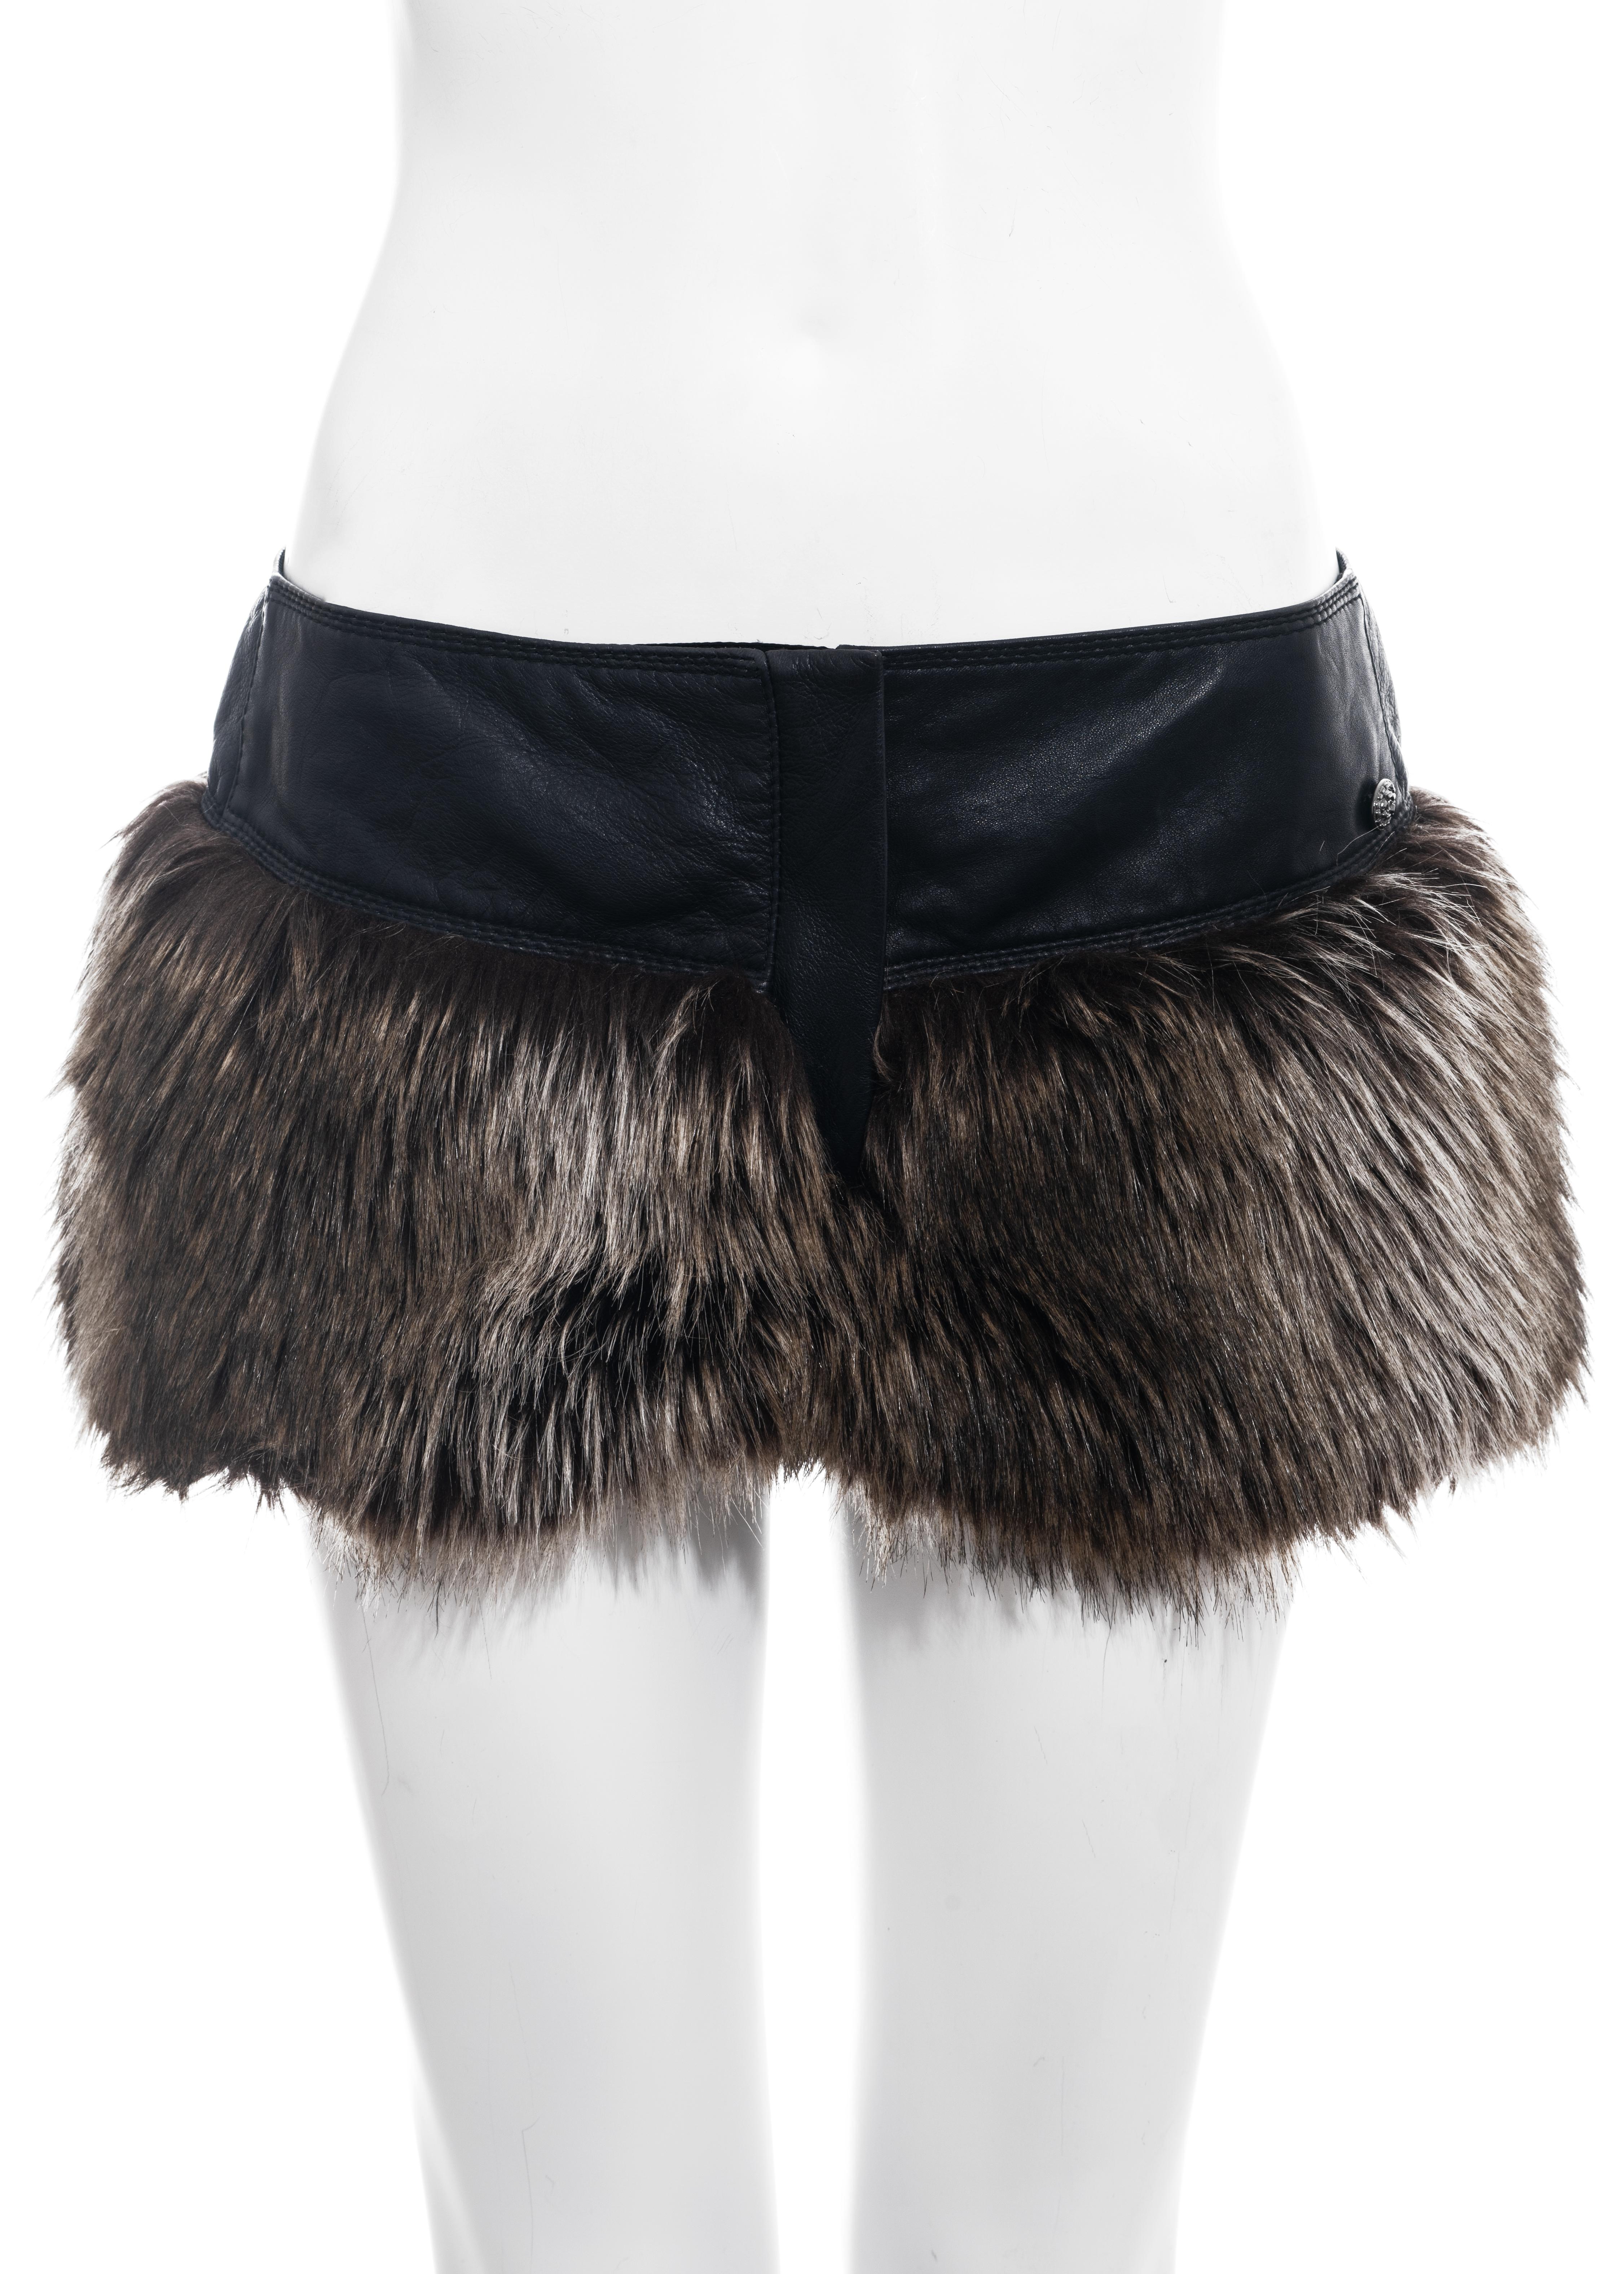 ▪ Chanel black leather mini shorts
▪ Designed by Karl Lagerfeld 
▪ Brown faux fur trim 
▪ Faux fur: 65% Acrylic, 19% Modacrylic, 16% Cotton
▪ Lining: 100% Silk
▪ Inset: 100% Leather
▪ FR 38 - UK 10 - US 6
▪ Fall-Winter 2010